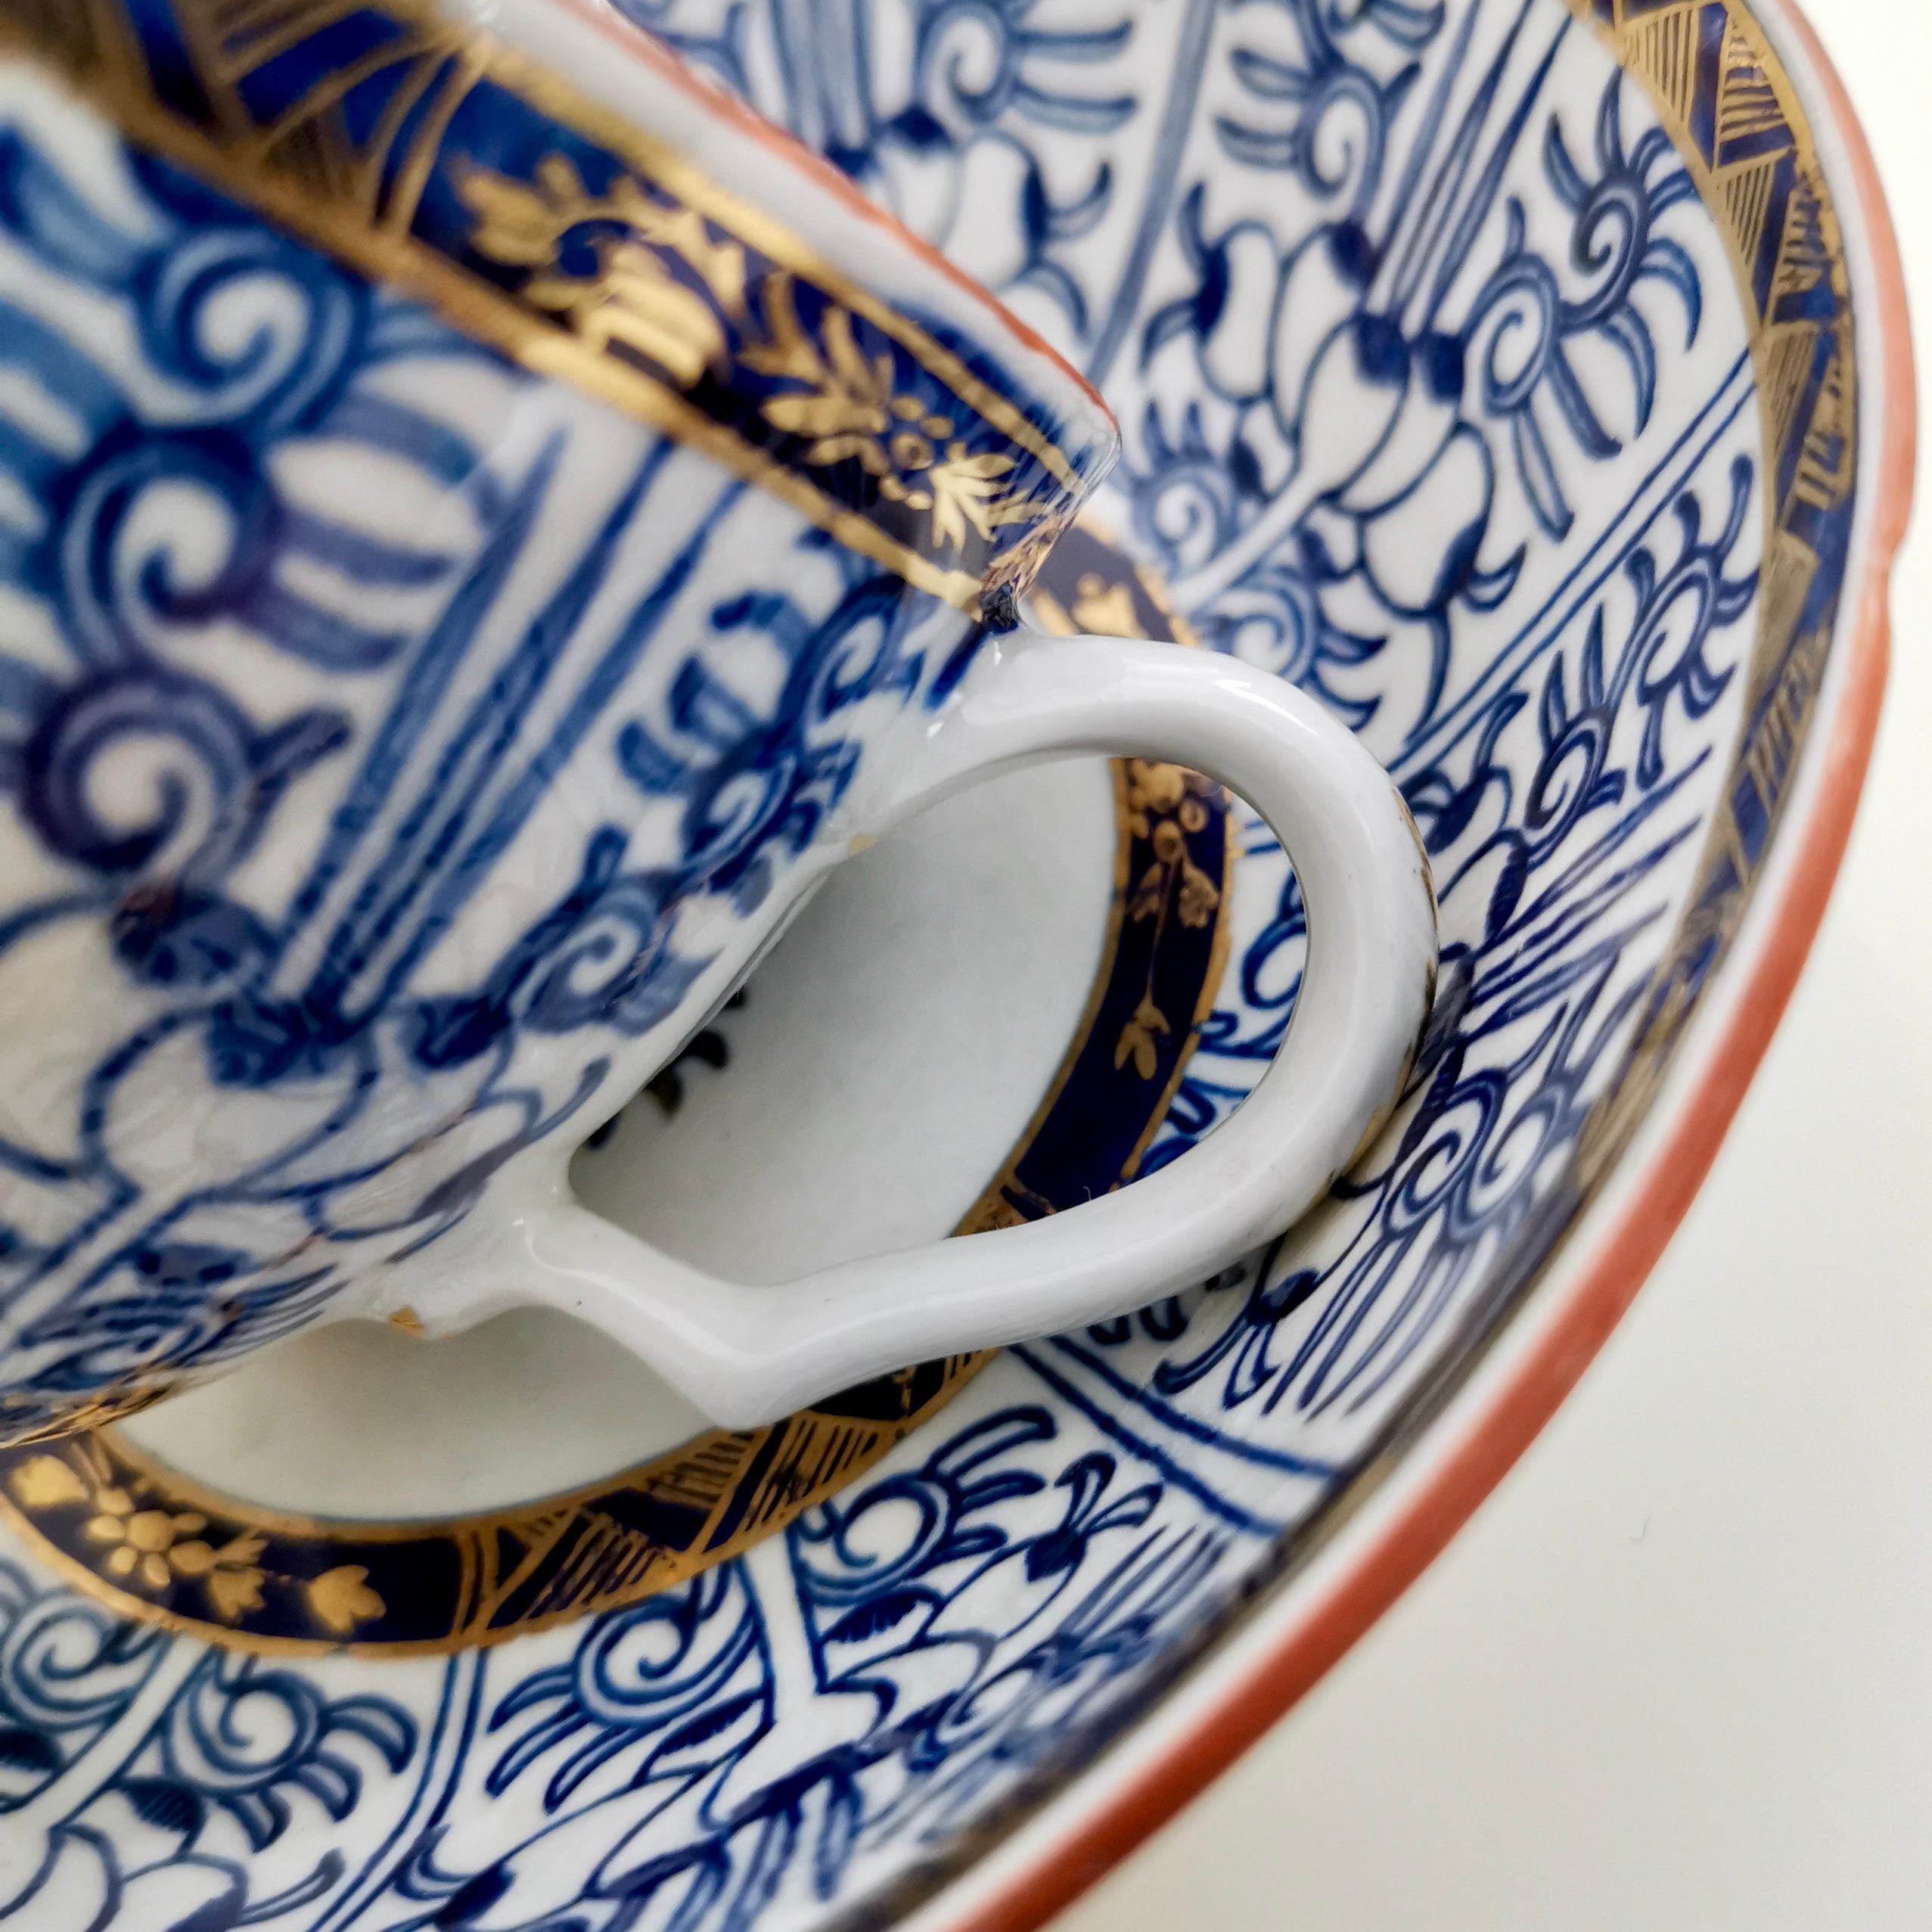 George III Chamberlain Worcester Porcelain Teacup, Blue Lily Pattern, circa 1815